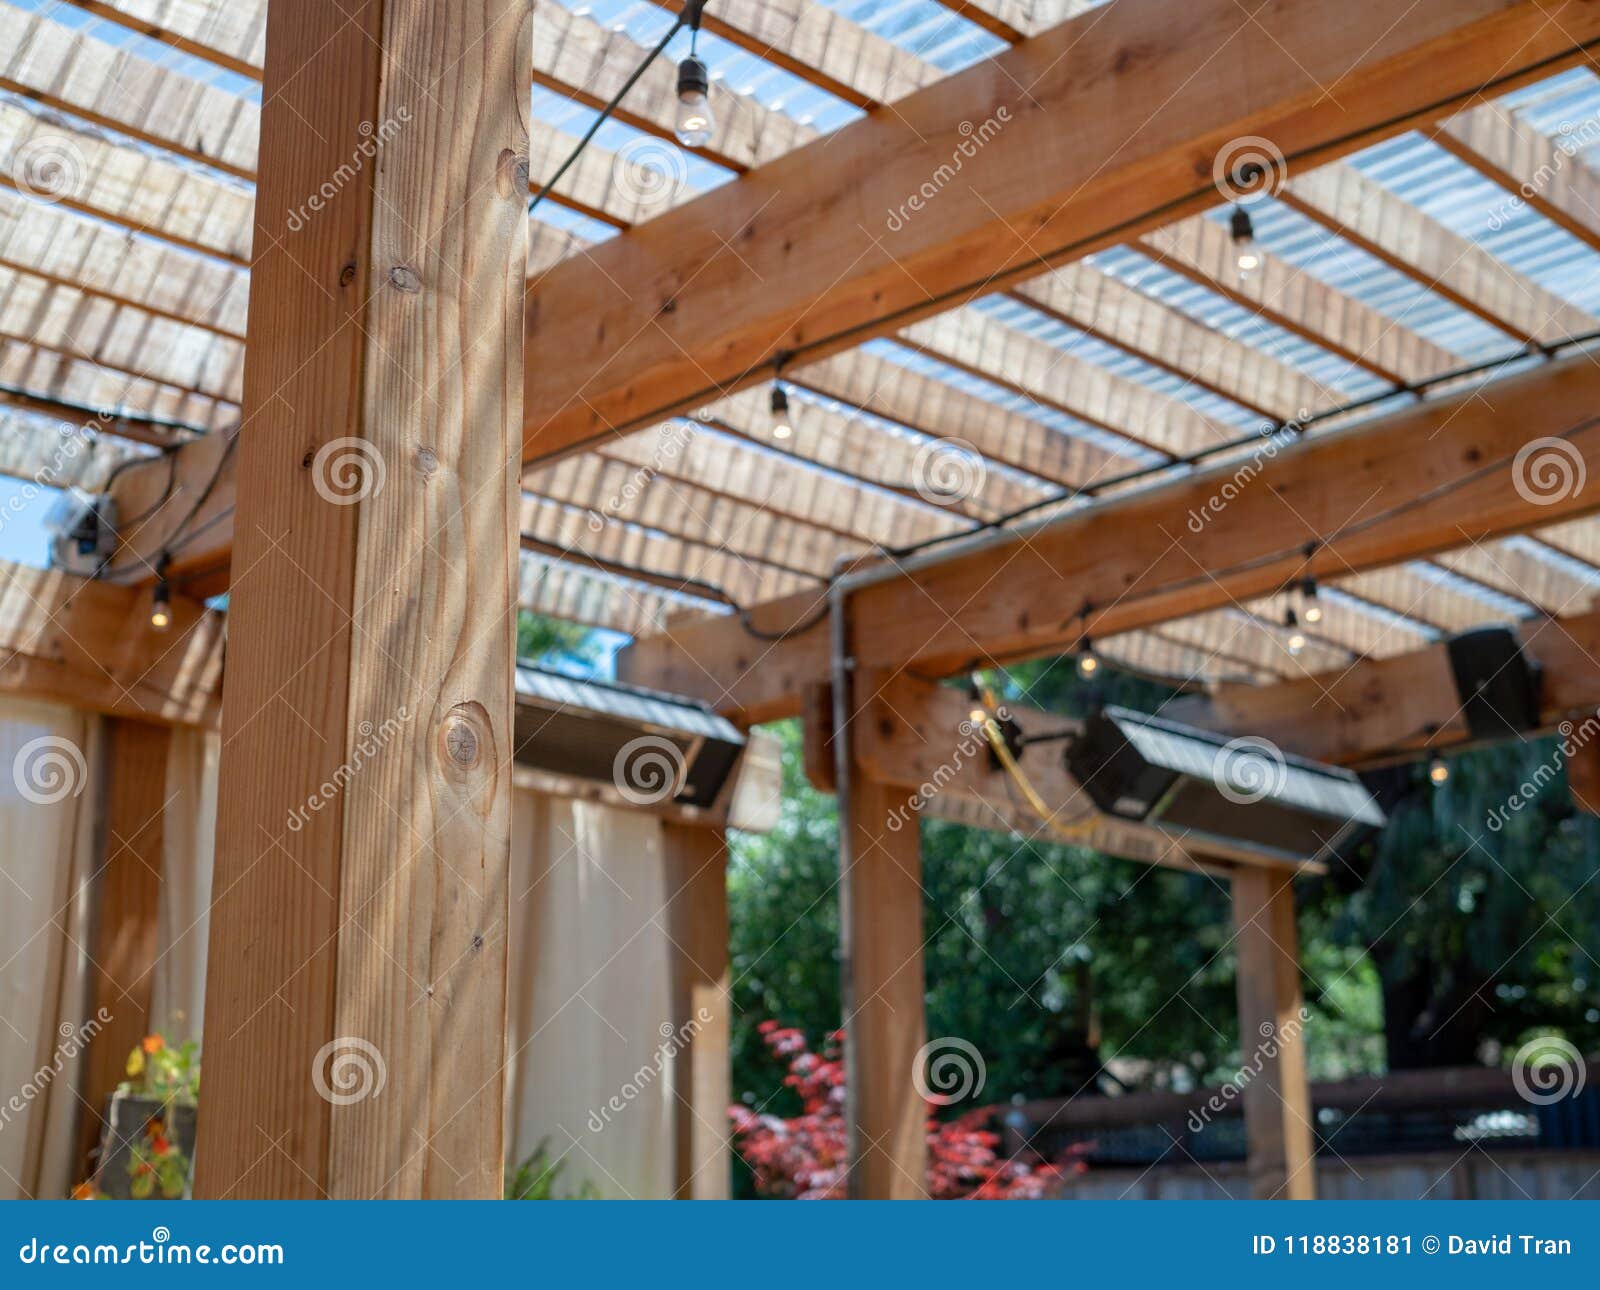 Outdoor Restaurant Set Up With Patio And Wooden Overhang And Spe